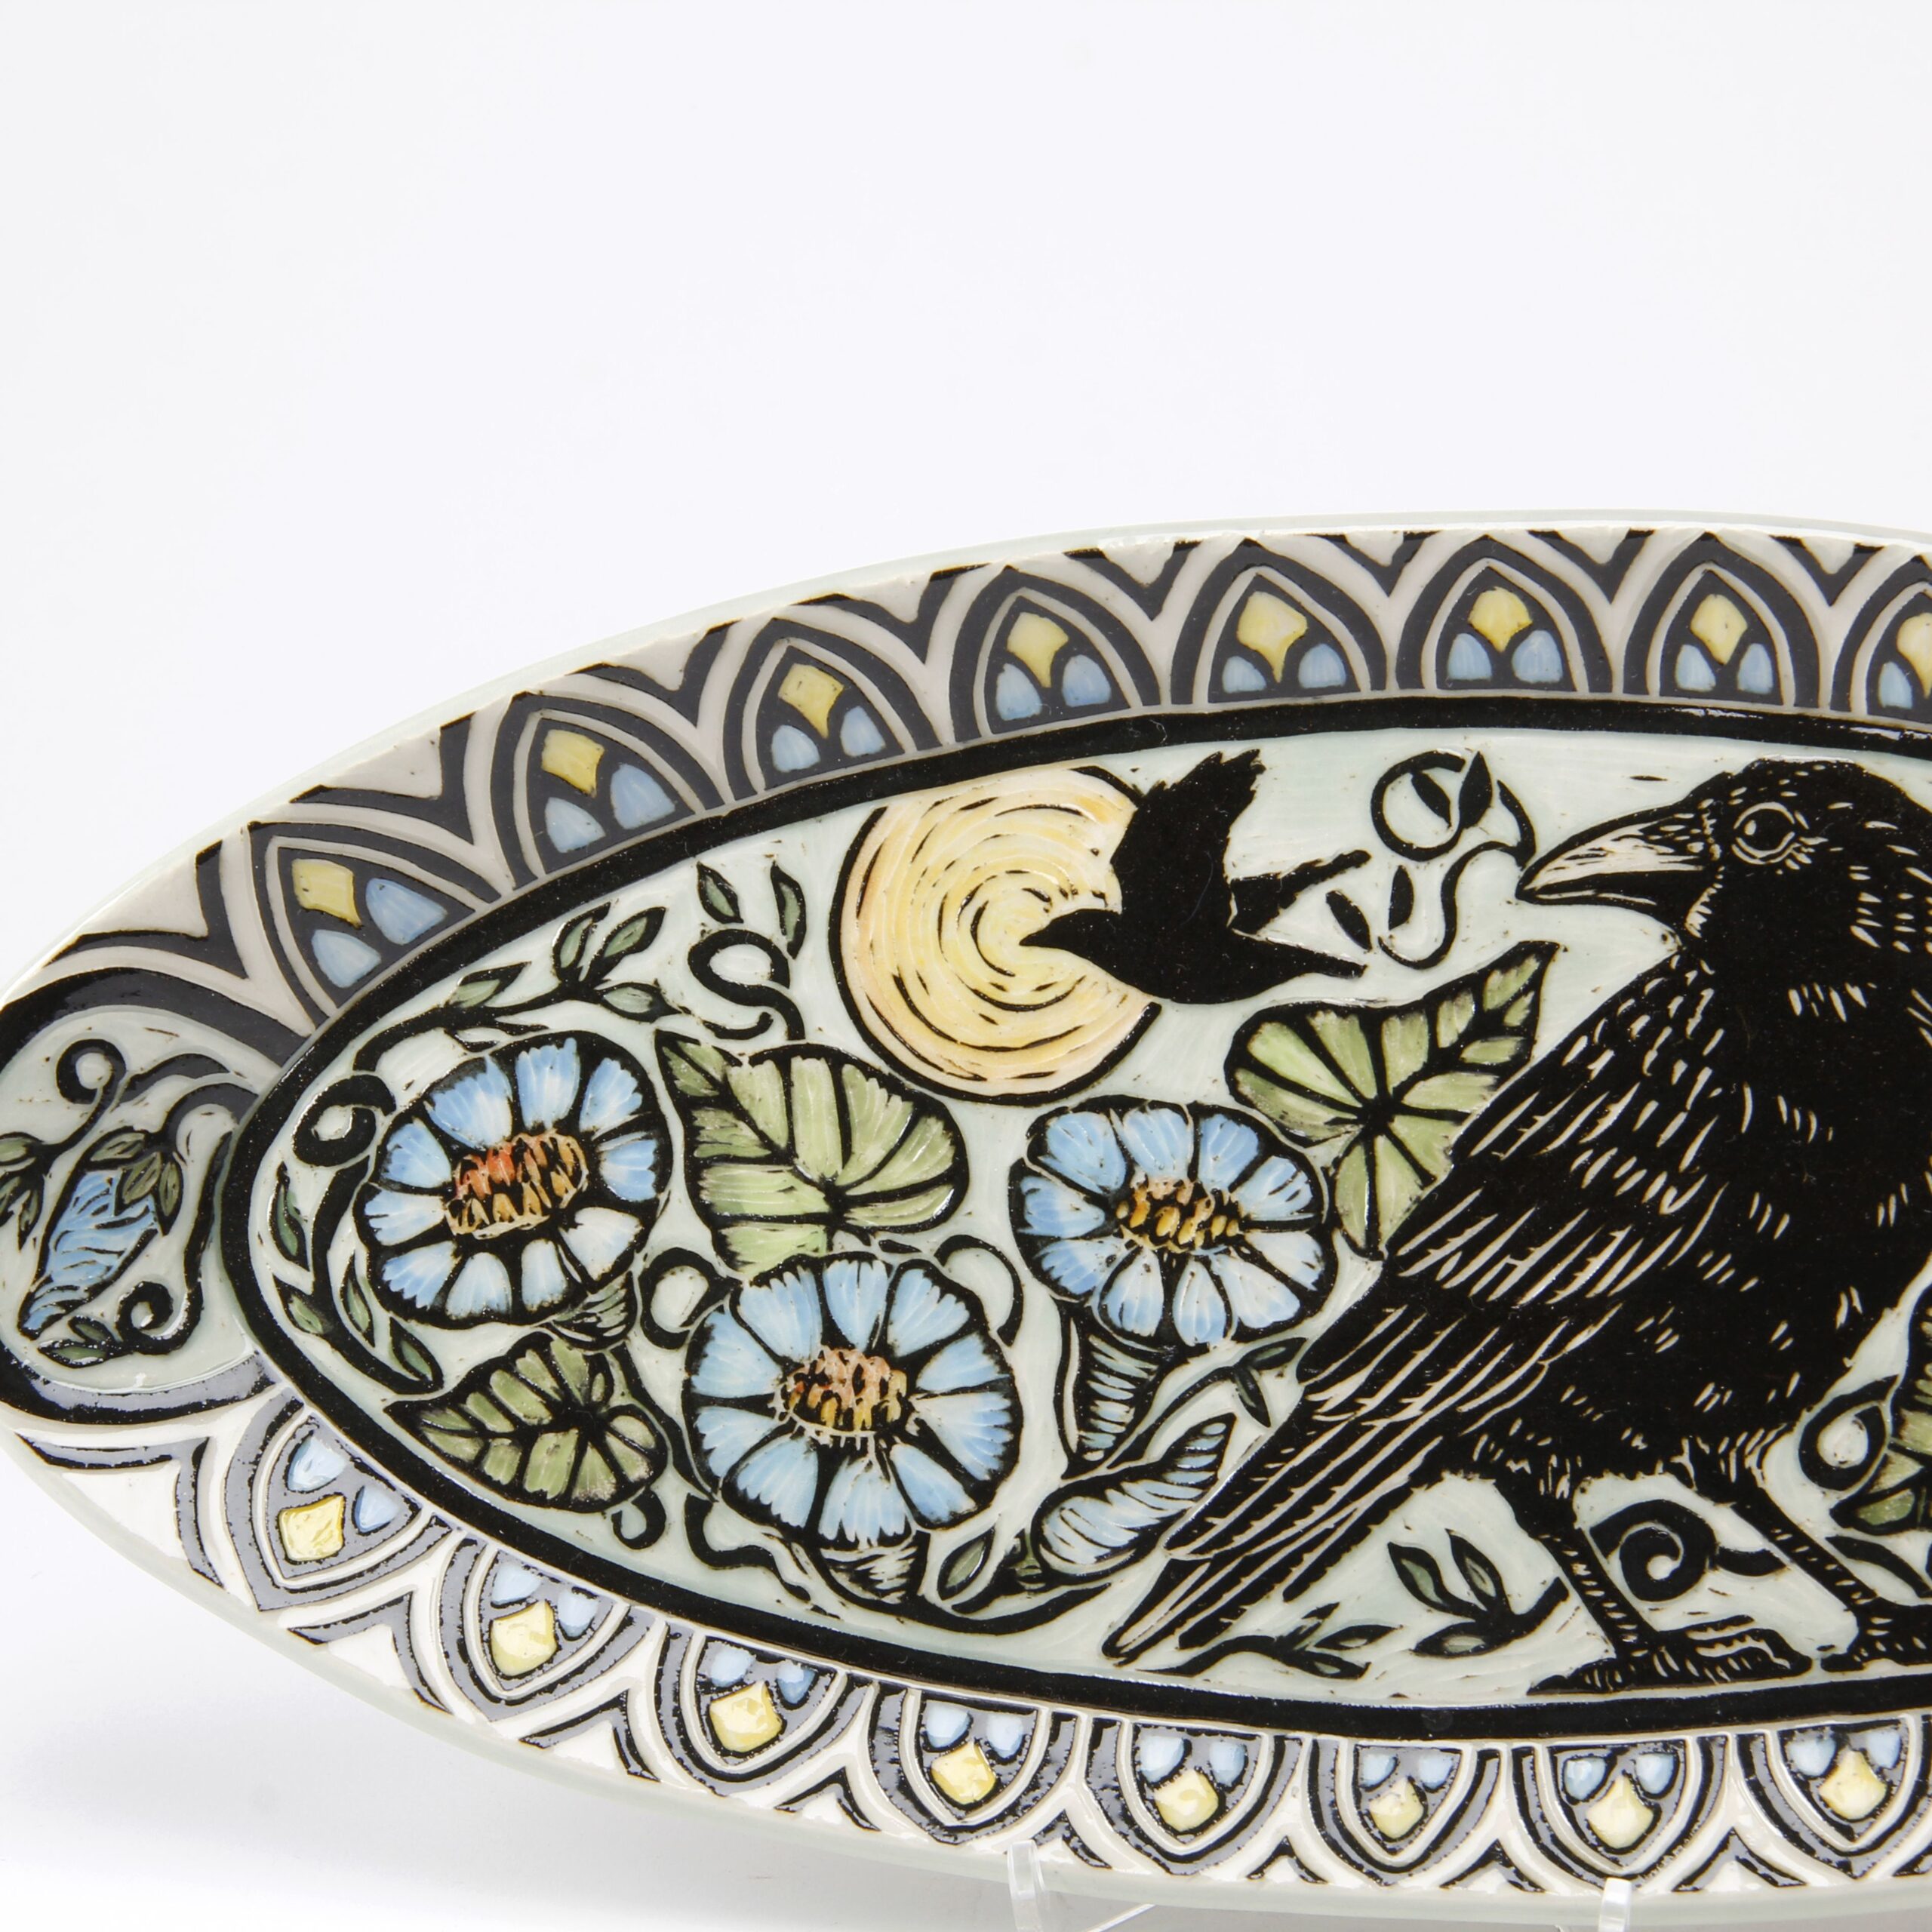 Jocelyn Jenkins: Sgraffito Crow Oval Plate Product Image 2 of 3